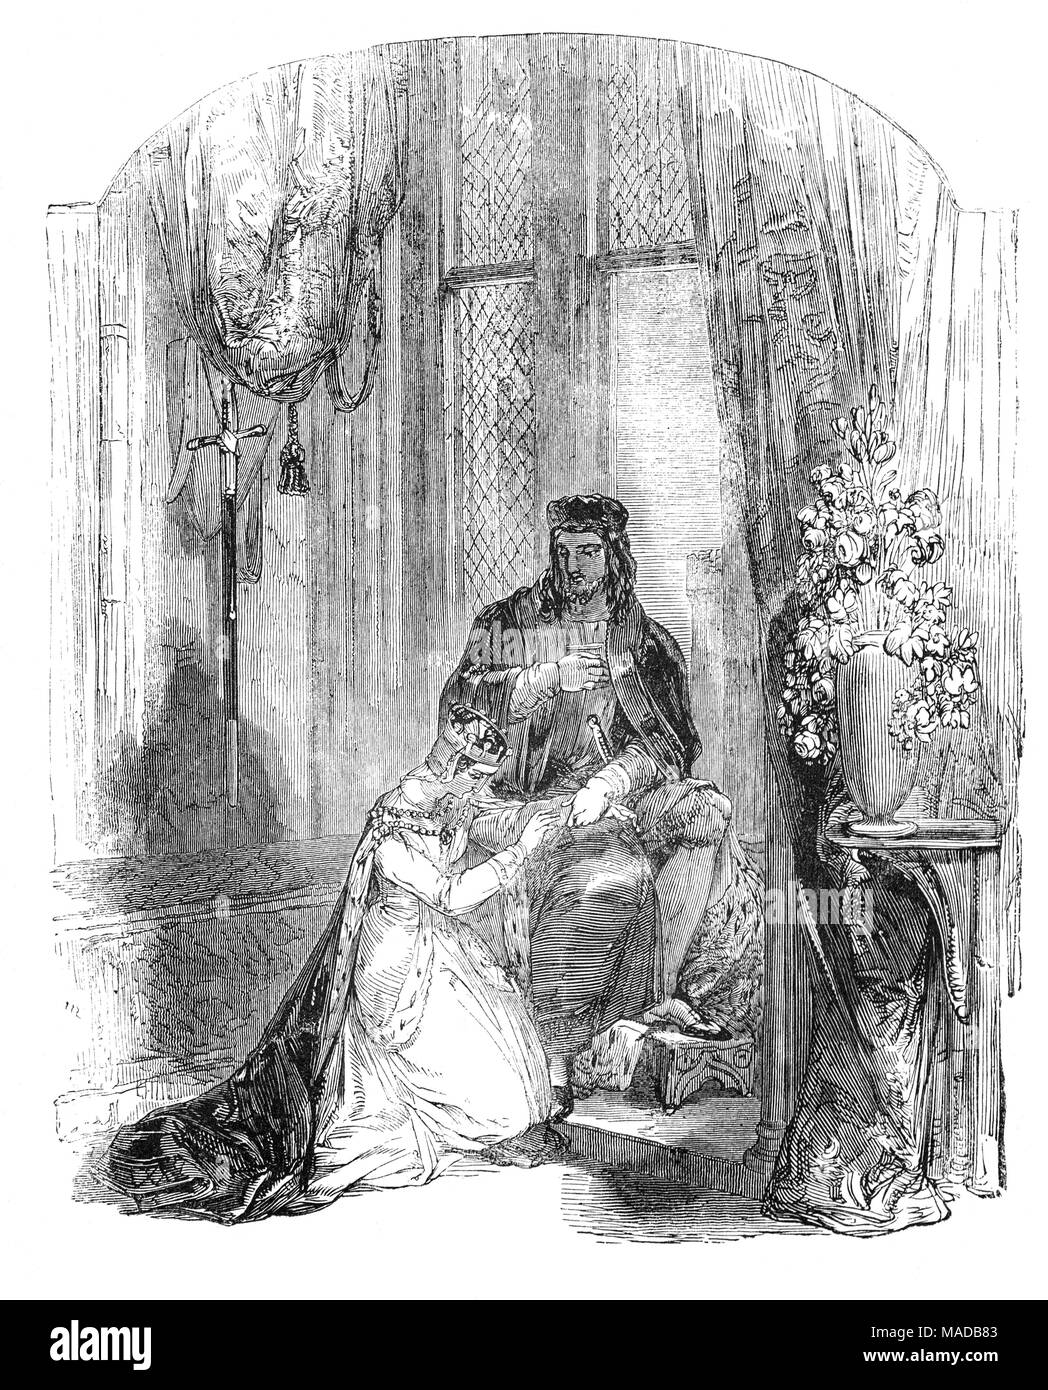 King Edward III and the Countess of Salisbury, an English noblewoman, remembered for her relationship with King. According to rumour, King Edward III was so enamoured of the countess that he forced his attentions on her in around 1341, after having relieved a Scottish siege on Wark Castle, where she lived, while her husband was out of the country. Around 1348, the Order of the Garter was founded by Edward III  after an incident at a ball when the 'Countess of Salisbury' dropped a garter and the king picked it up Stock Photo